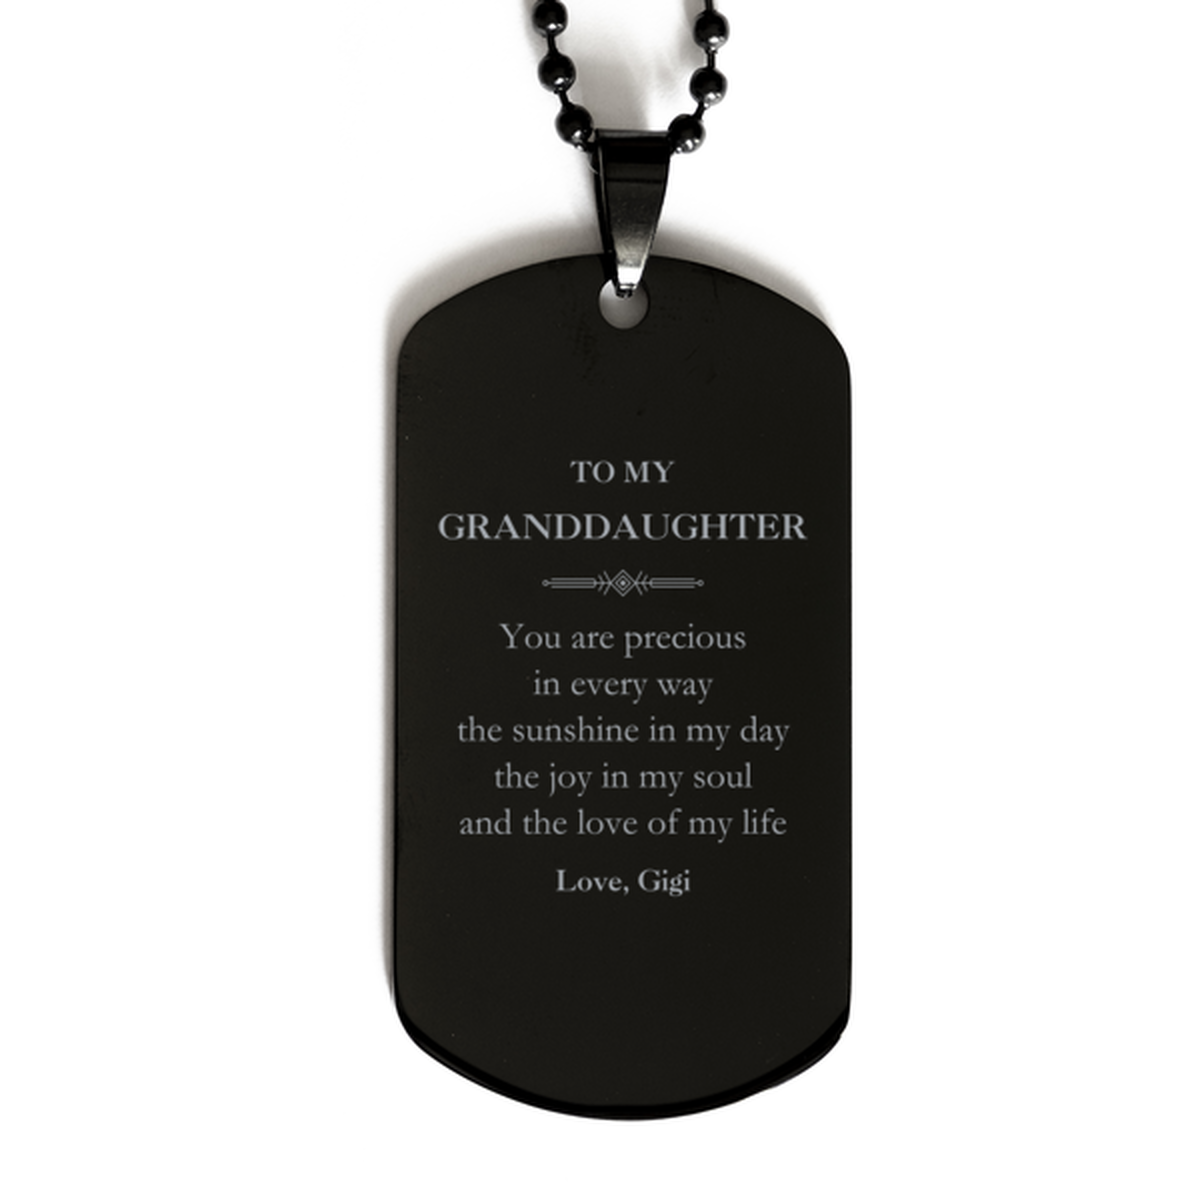 Graduation Gifts for Granddaughter Black Dog Tag Present from Gigi, Christmas Granddaughter Birthday Gifts Granddaughter You are precious in every way the sunshine in my day. Love, Gigi